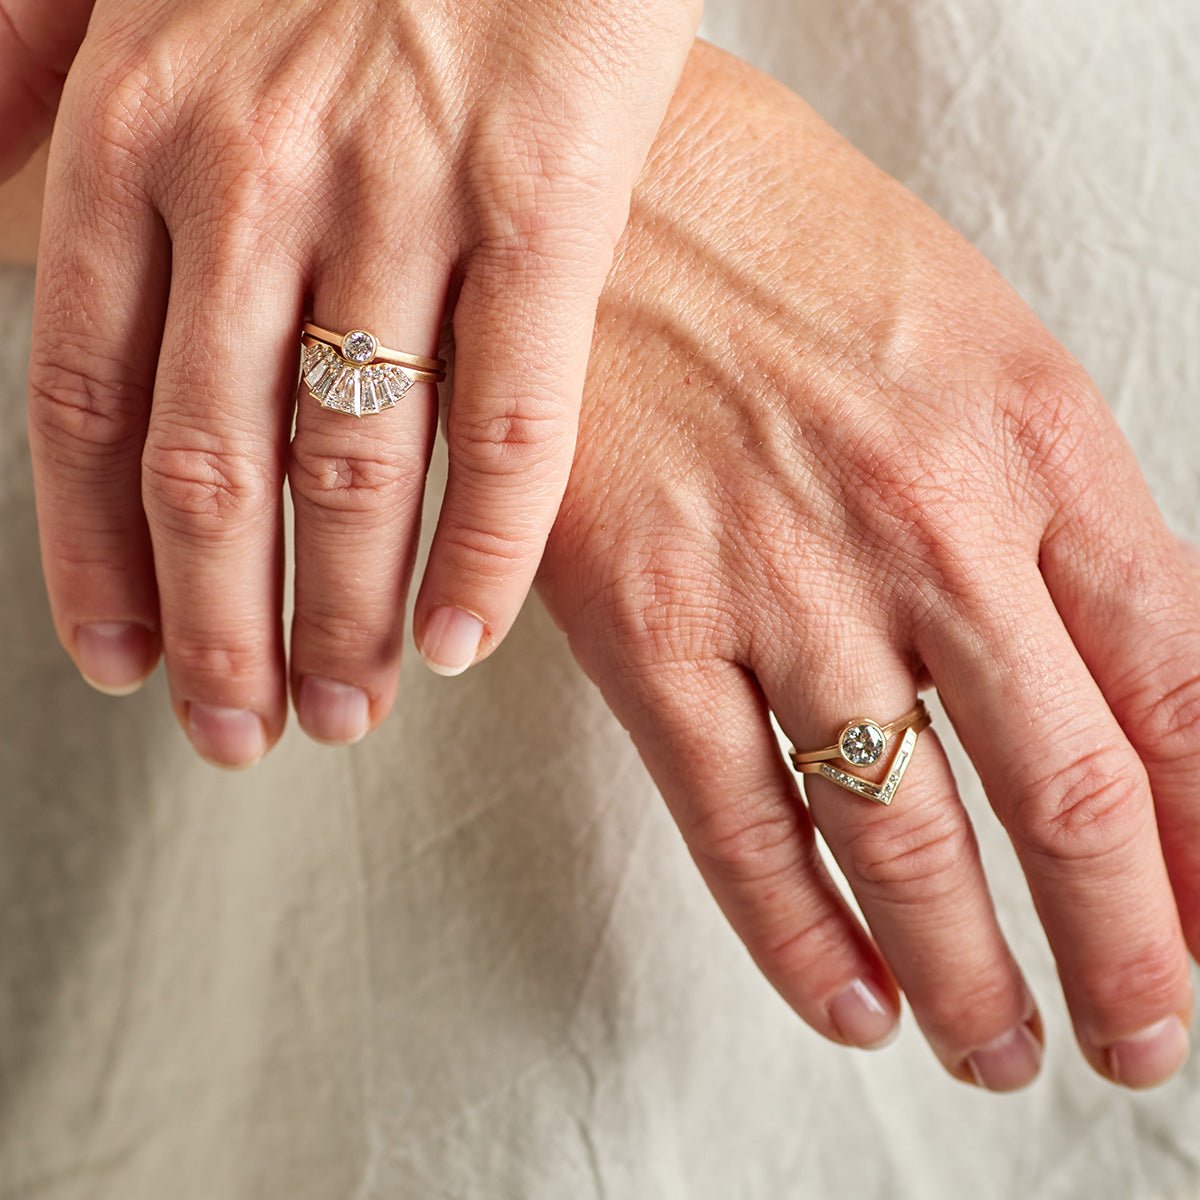 Model wears the Apricus ring stacked with the Sano ring (0.25 ct) on their left hand. On their right hand, they wear the Altus ring and Sano ring (0.6 ct).